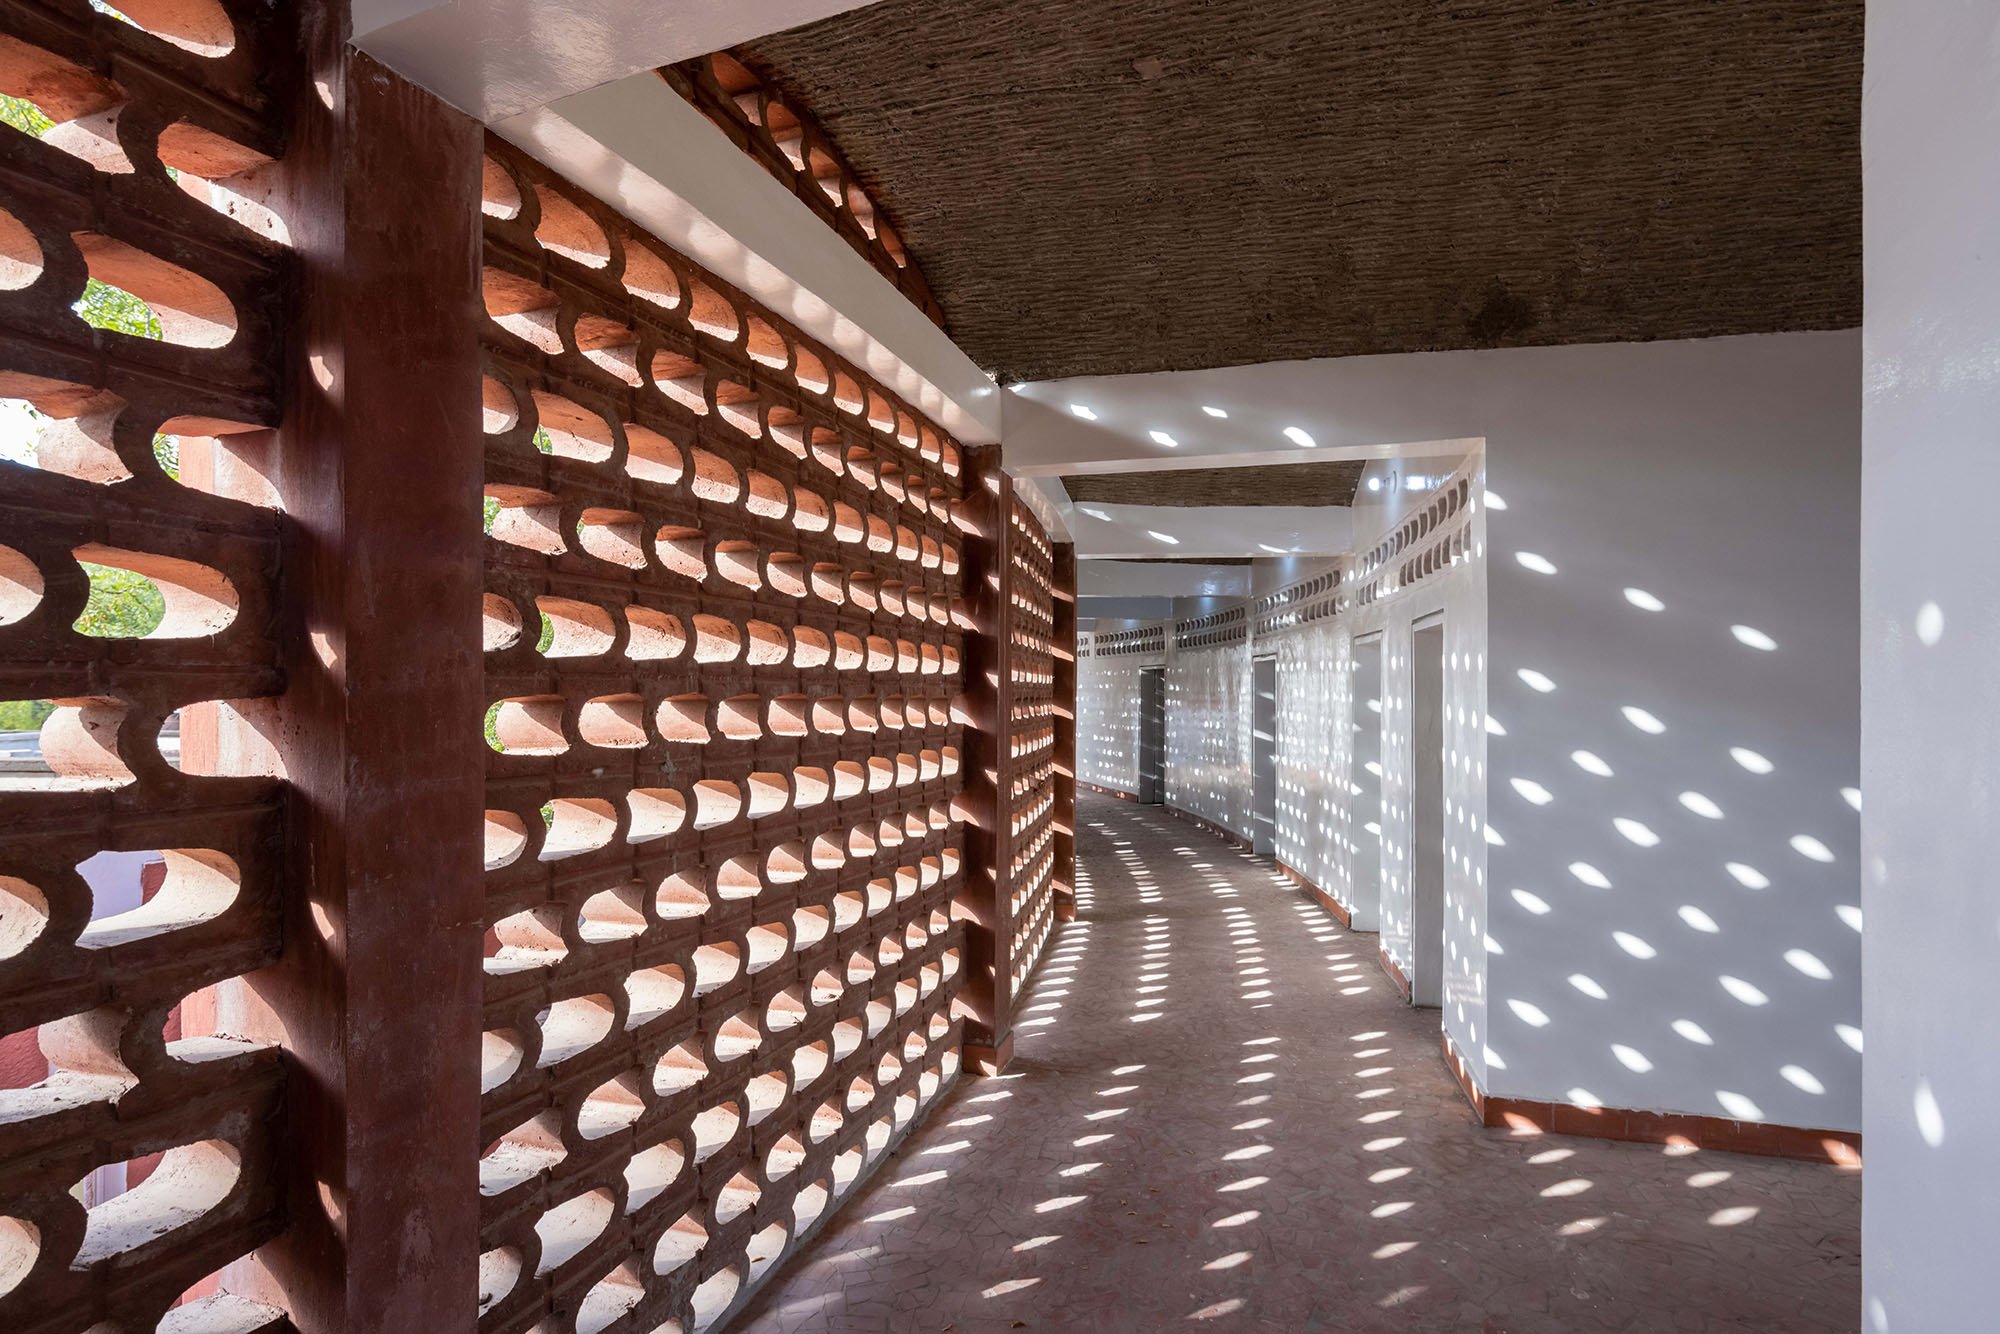 Maternity and Paediatric Hospital in Tambacounda, Senegal, by Manuel Herz Photo: Iwan Baan Courtesy of the Josef and Anni Albers Foundation and Le Korsa